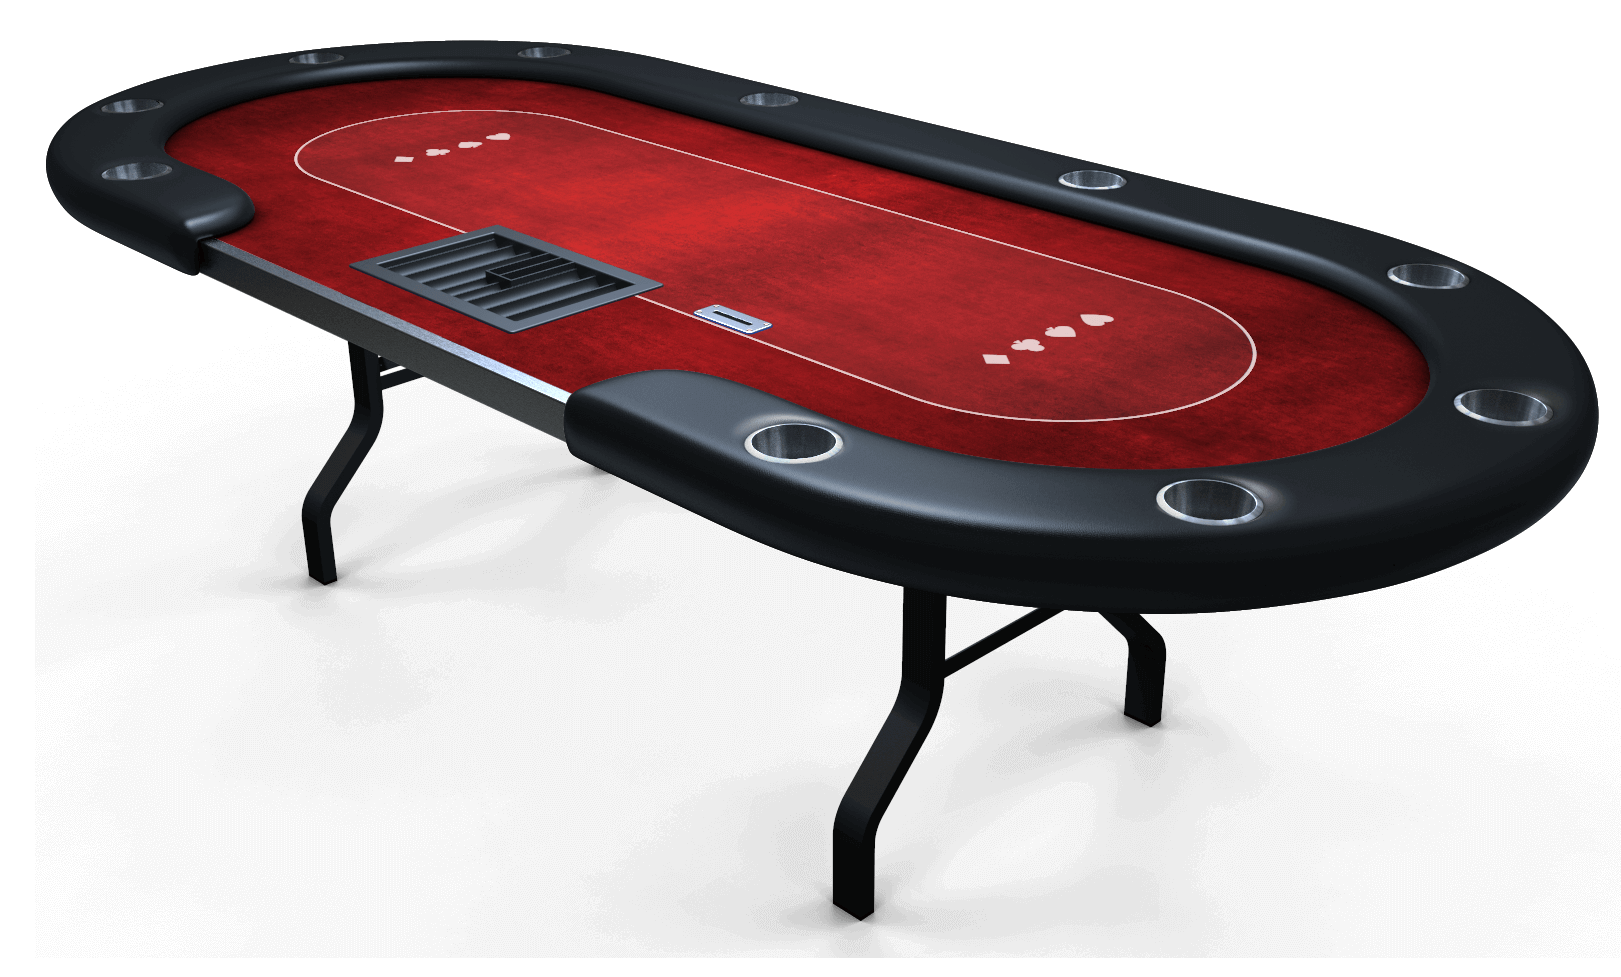 Oval-shaped poker table with ten cupholders in the black vinyl foam rail, an open stainless steel rail section for the dealer, red felt with a white pattern, a dealer box, and metal table legs.